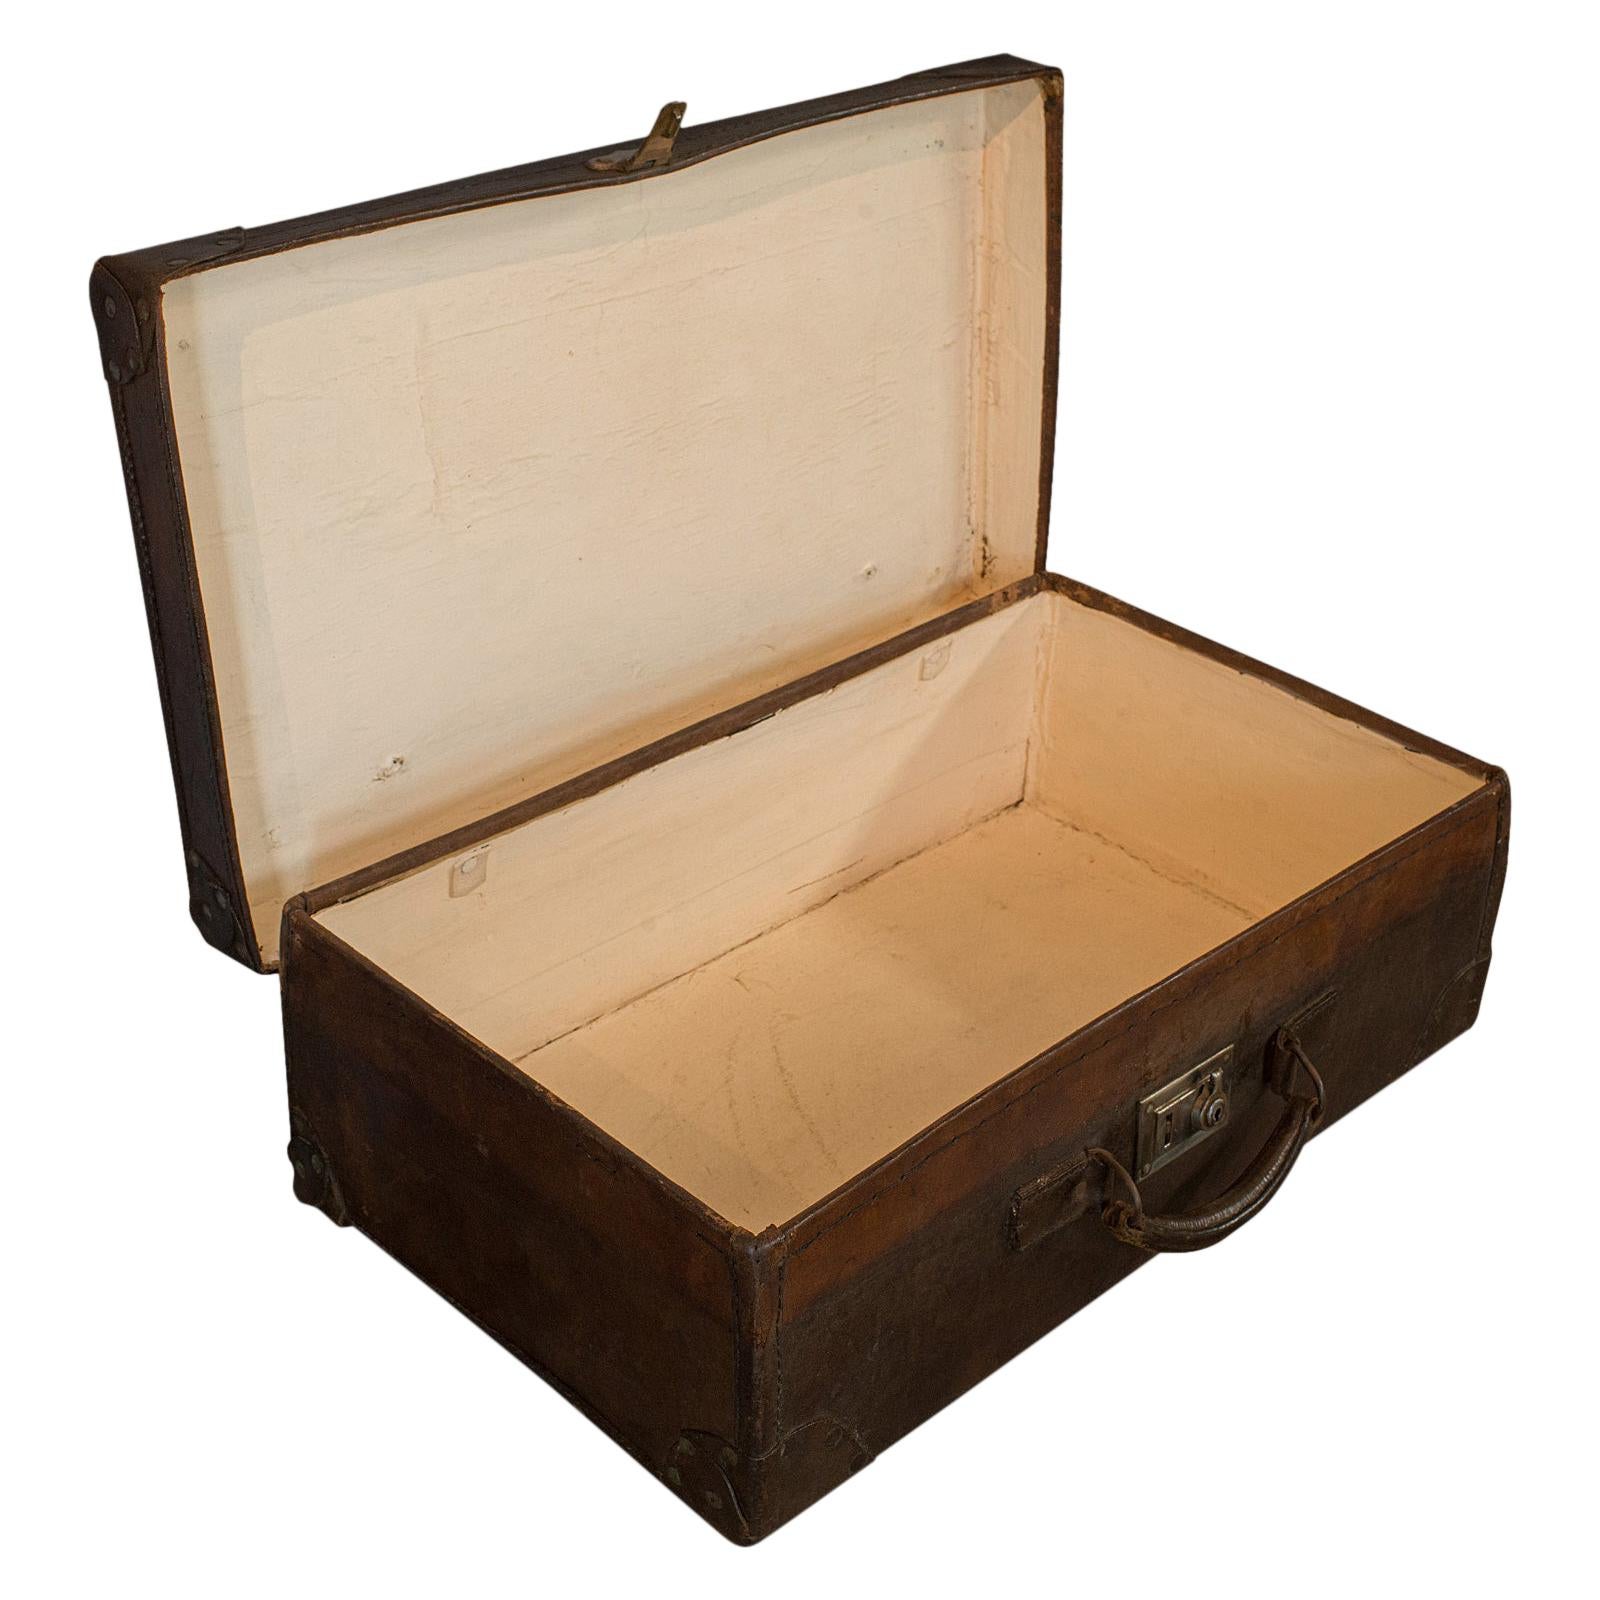 Antique Officer's Case, English, Leather, Travel, Suitcase, Luggage, circa 1920